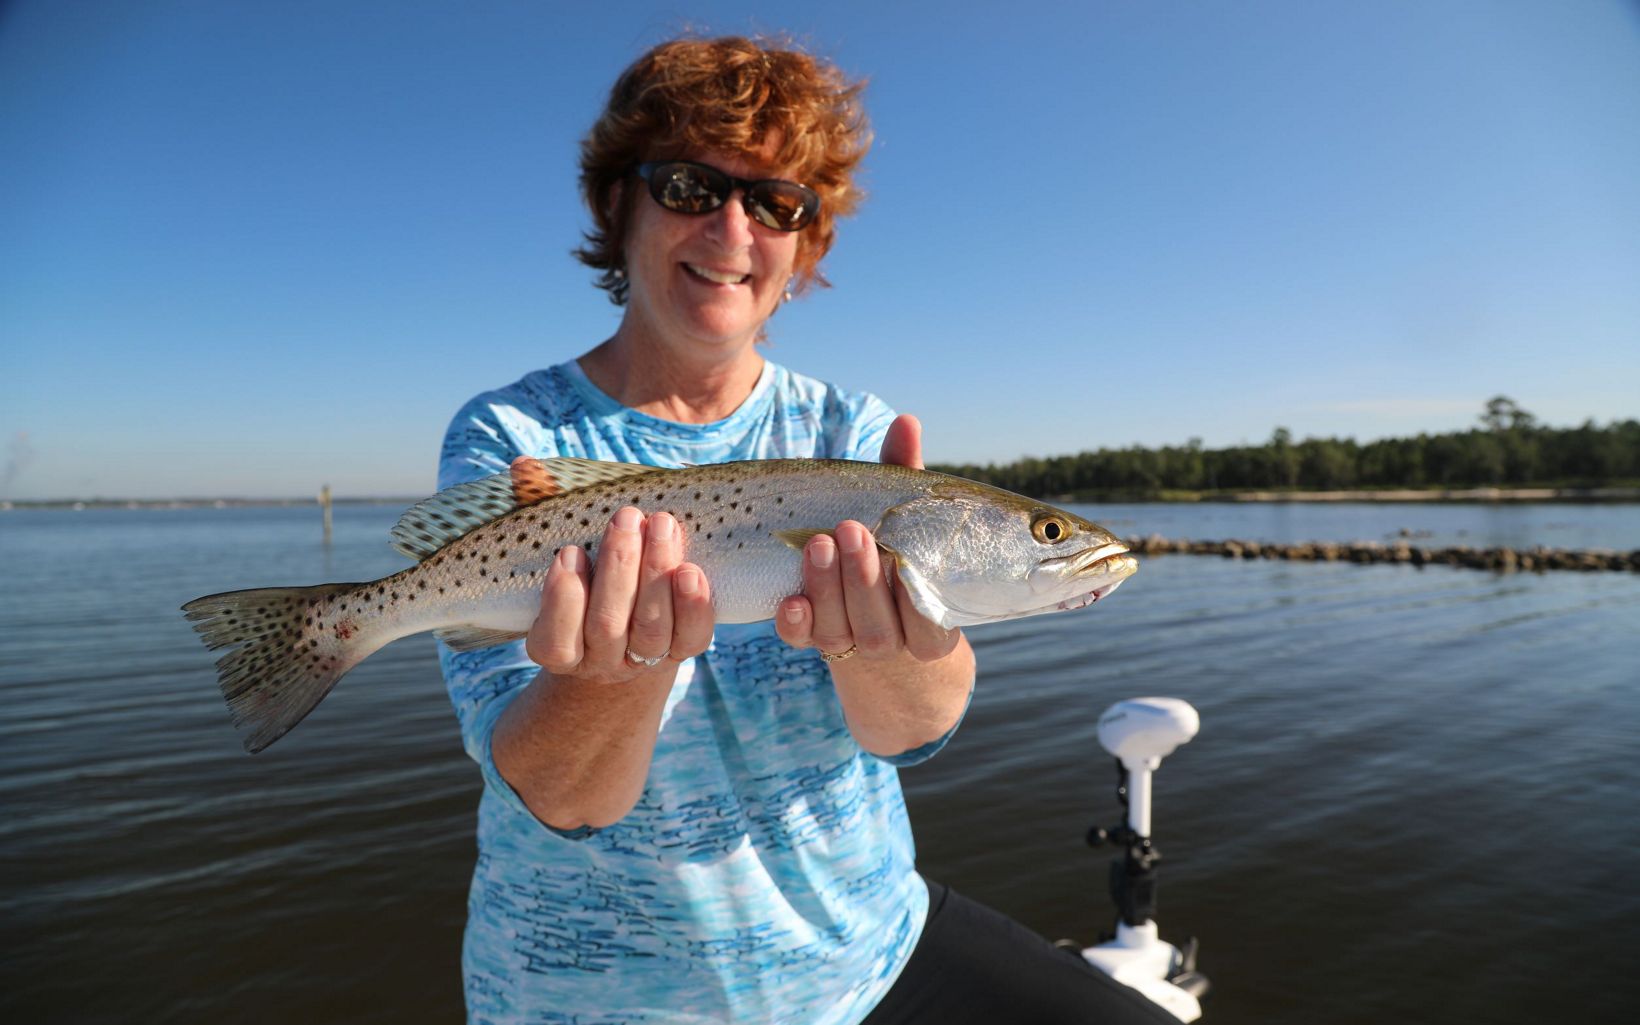 Sea Trout Caught Off the Reef Anne Birch, TNC FL's oceans and coasts strategy director, fished the reefs to see how they are supporting the natural ecosystem. © Russell C. Mick